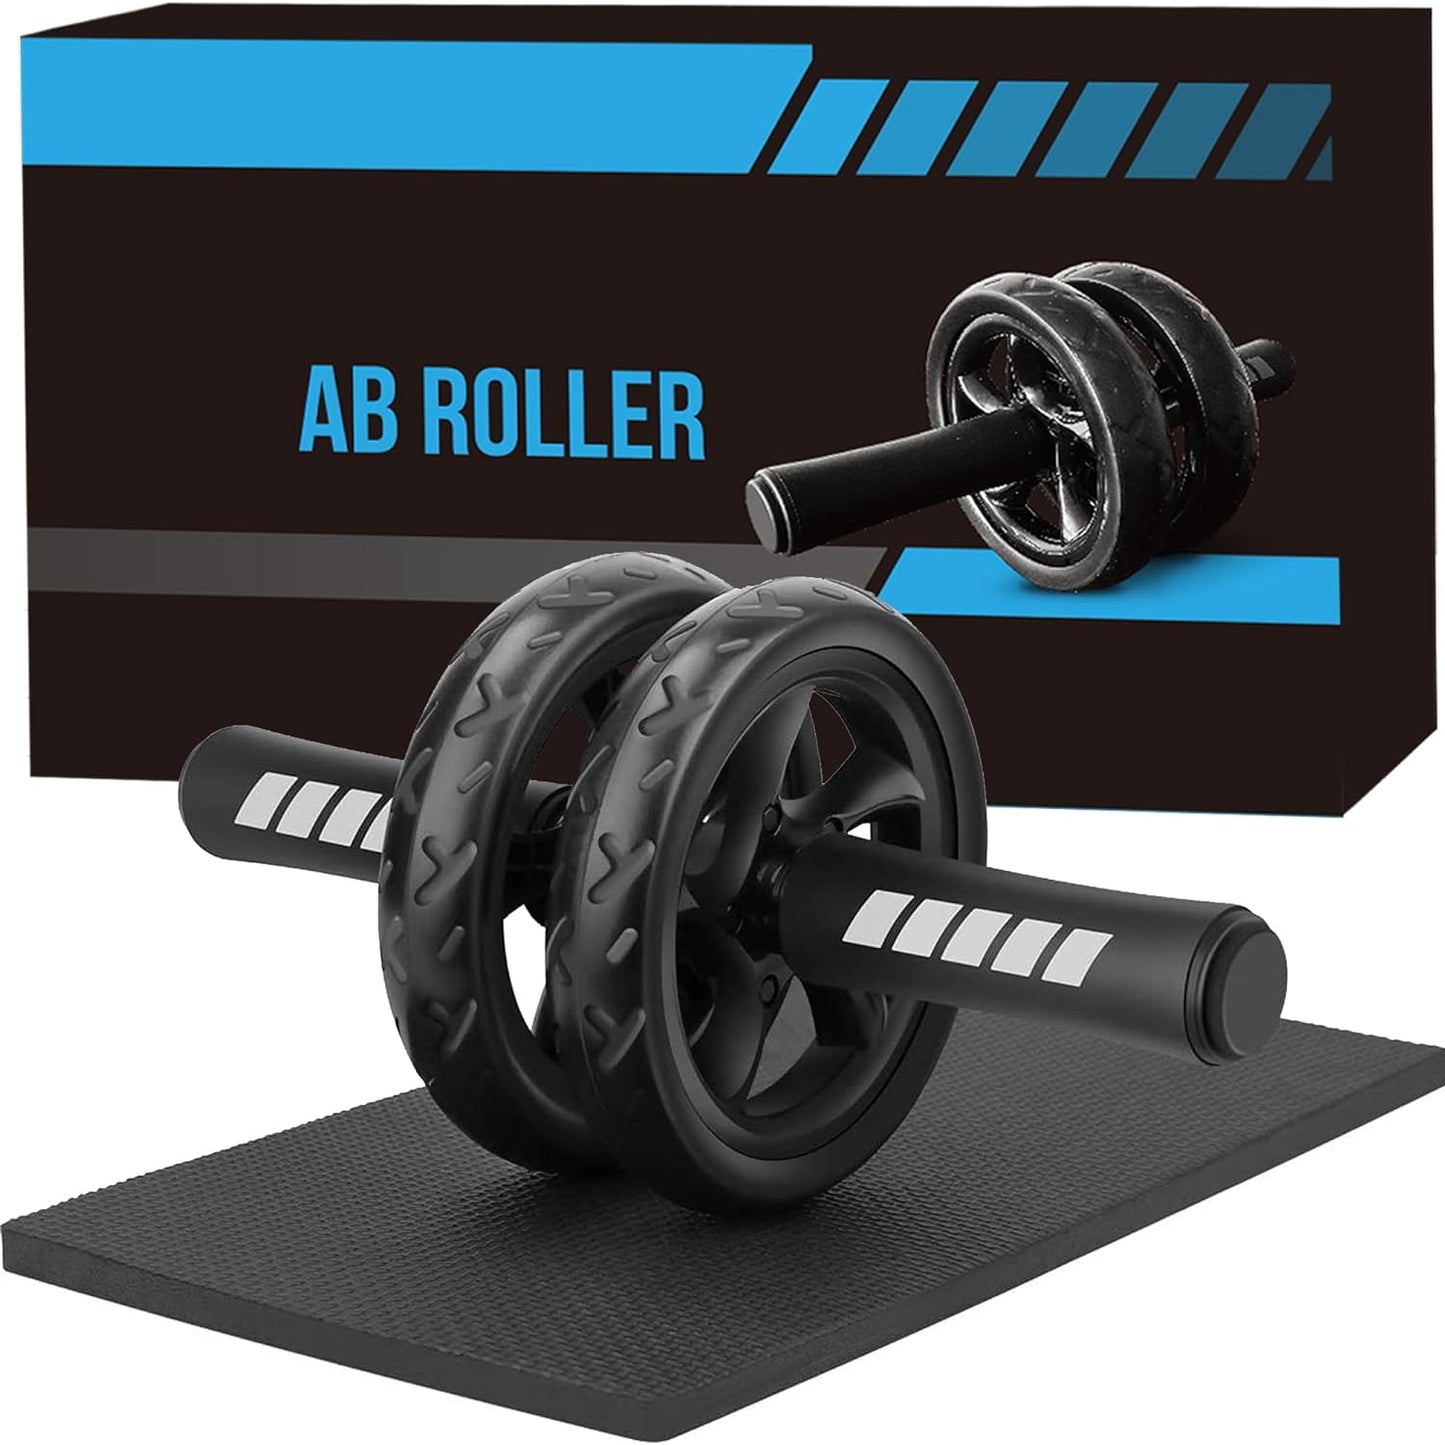 Abs Training Roller Abdominal Wheel, Ab Workout for Roll Out Exercises